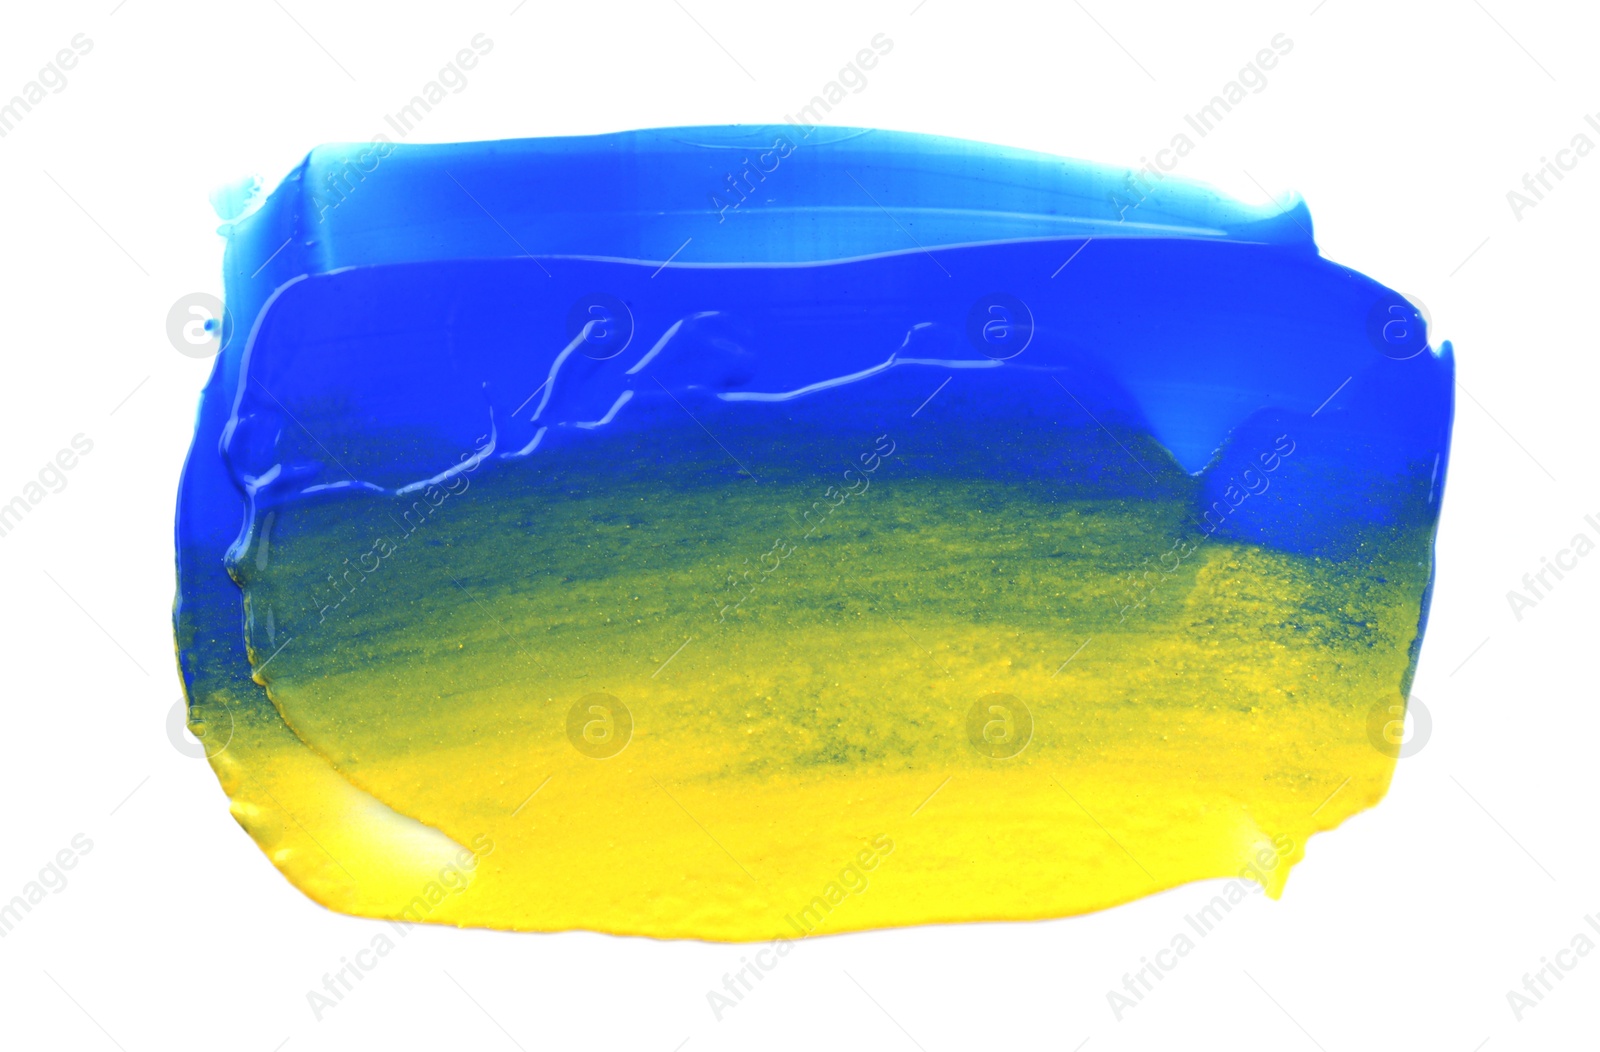 Photo of Blue and yellow paint samples on white background, top view